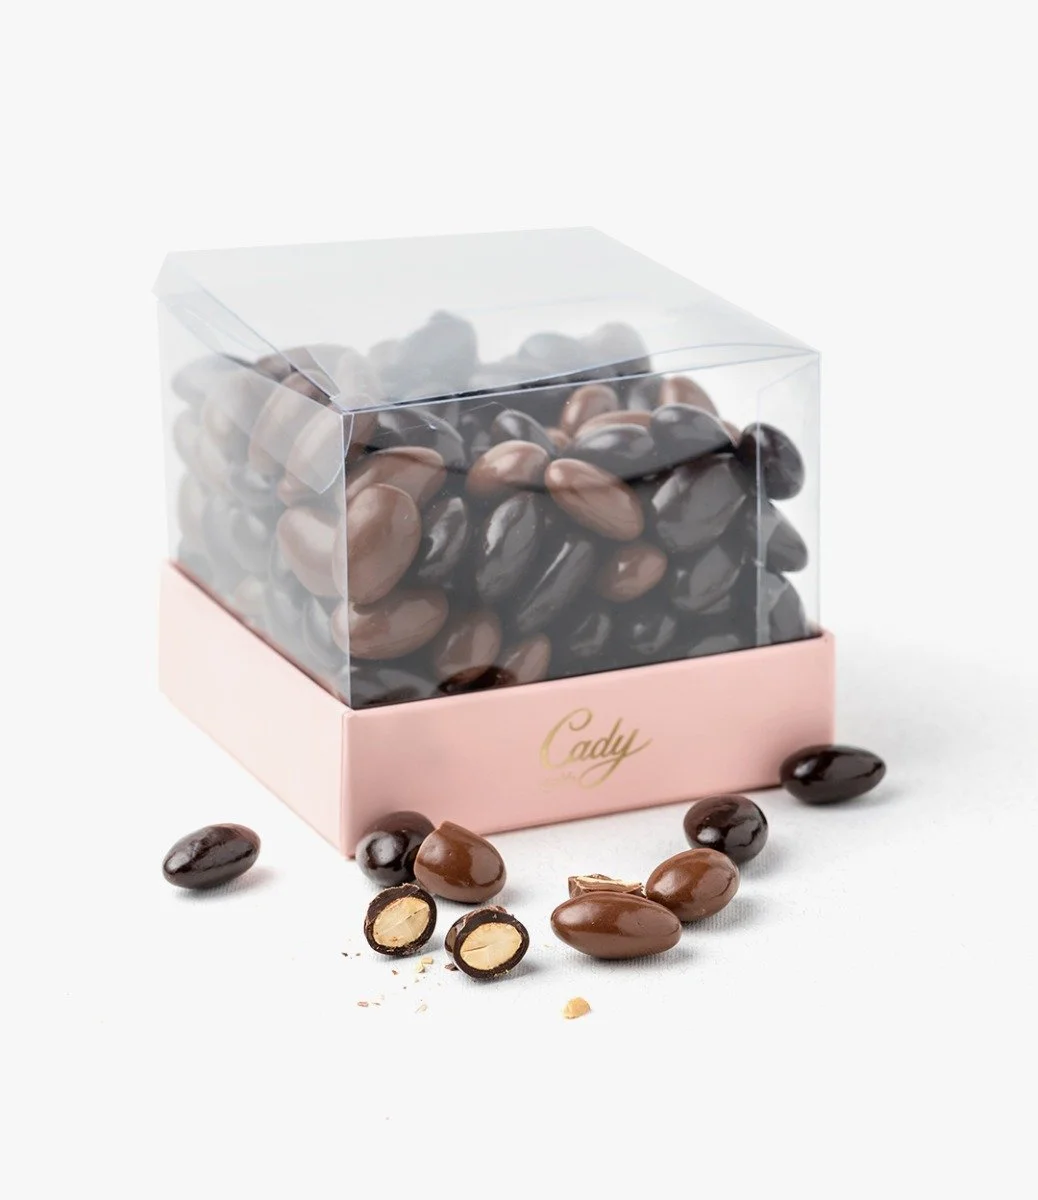 Almond Covered In Chocholate by Cady Sweets